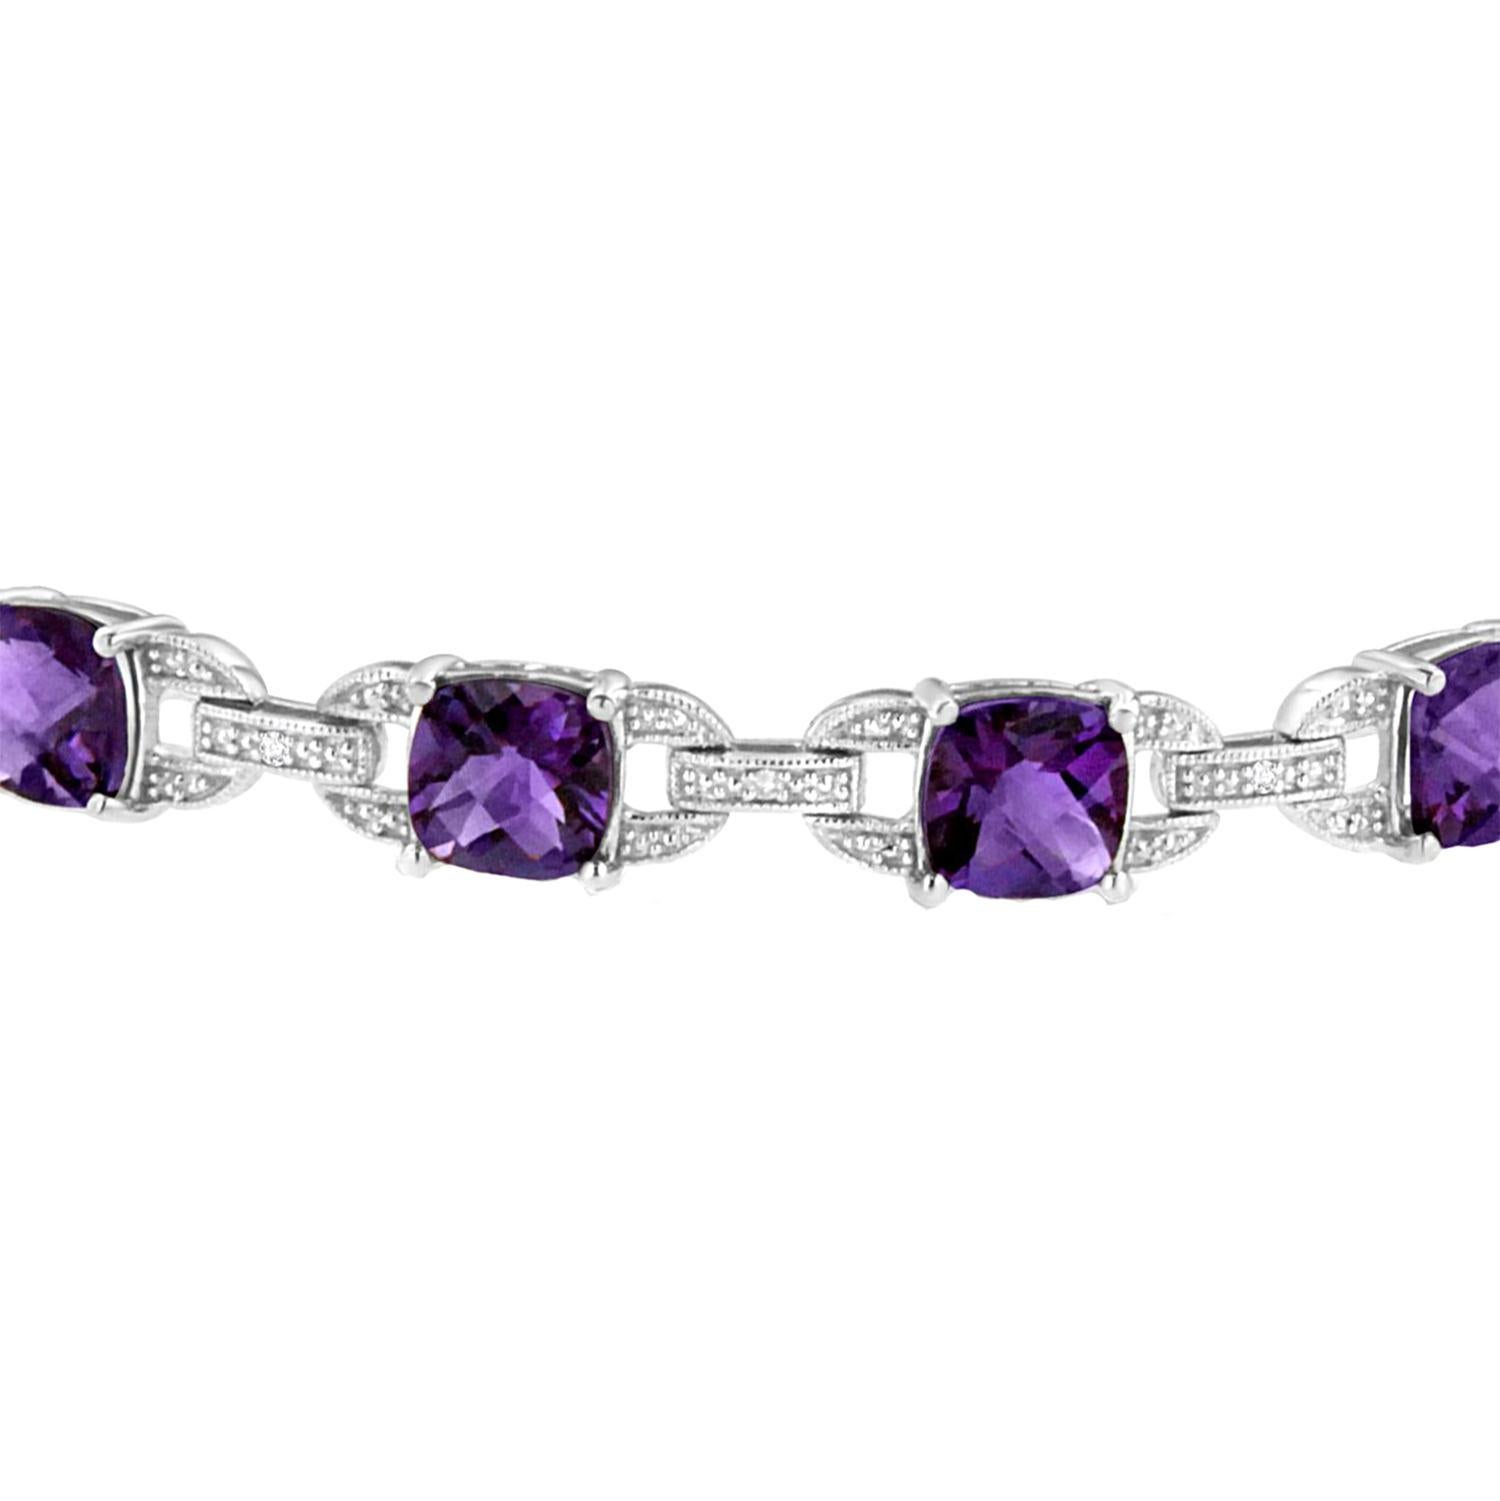 Contemporary Antique Amethyst and Diamond Bracelet 15 Carats Carats Sterling Silver For Sale